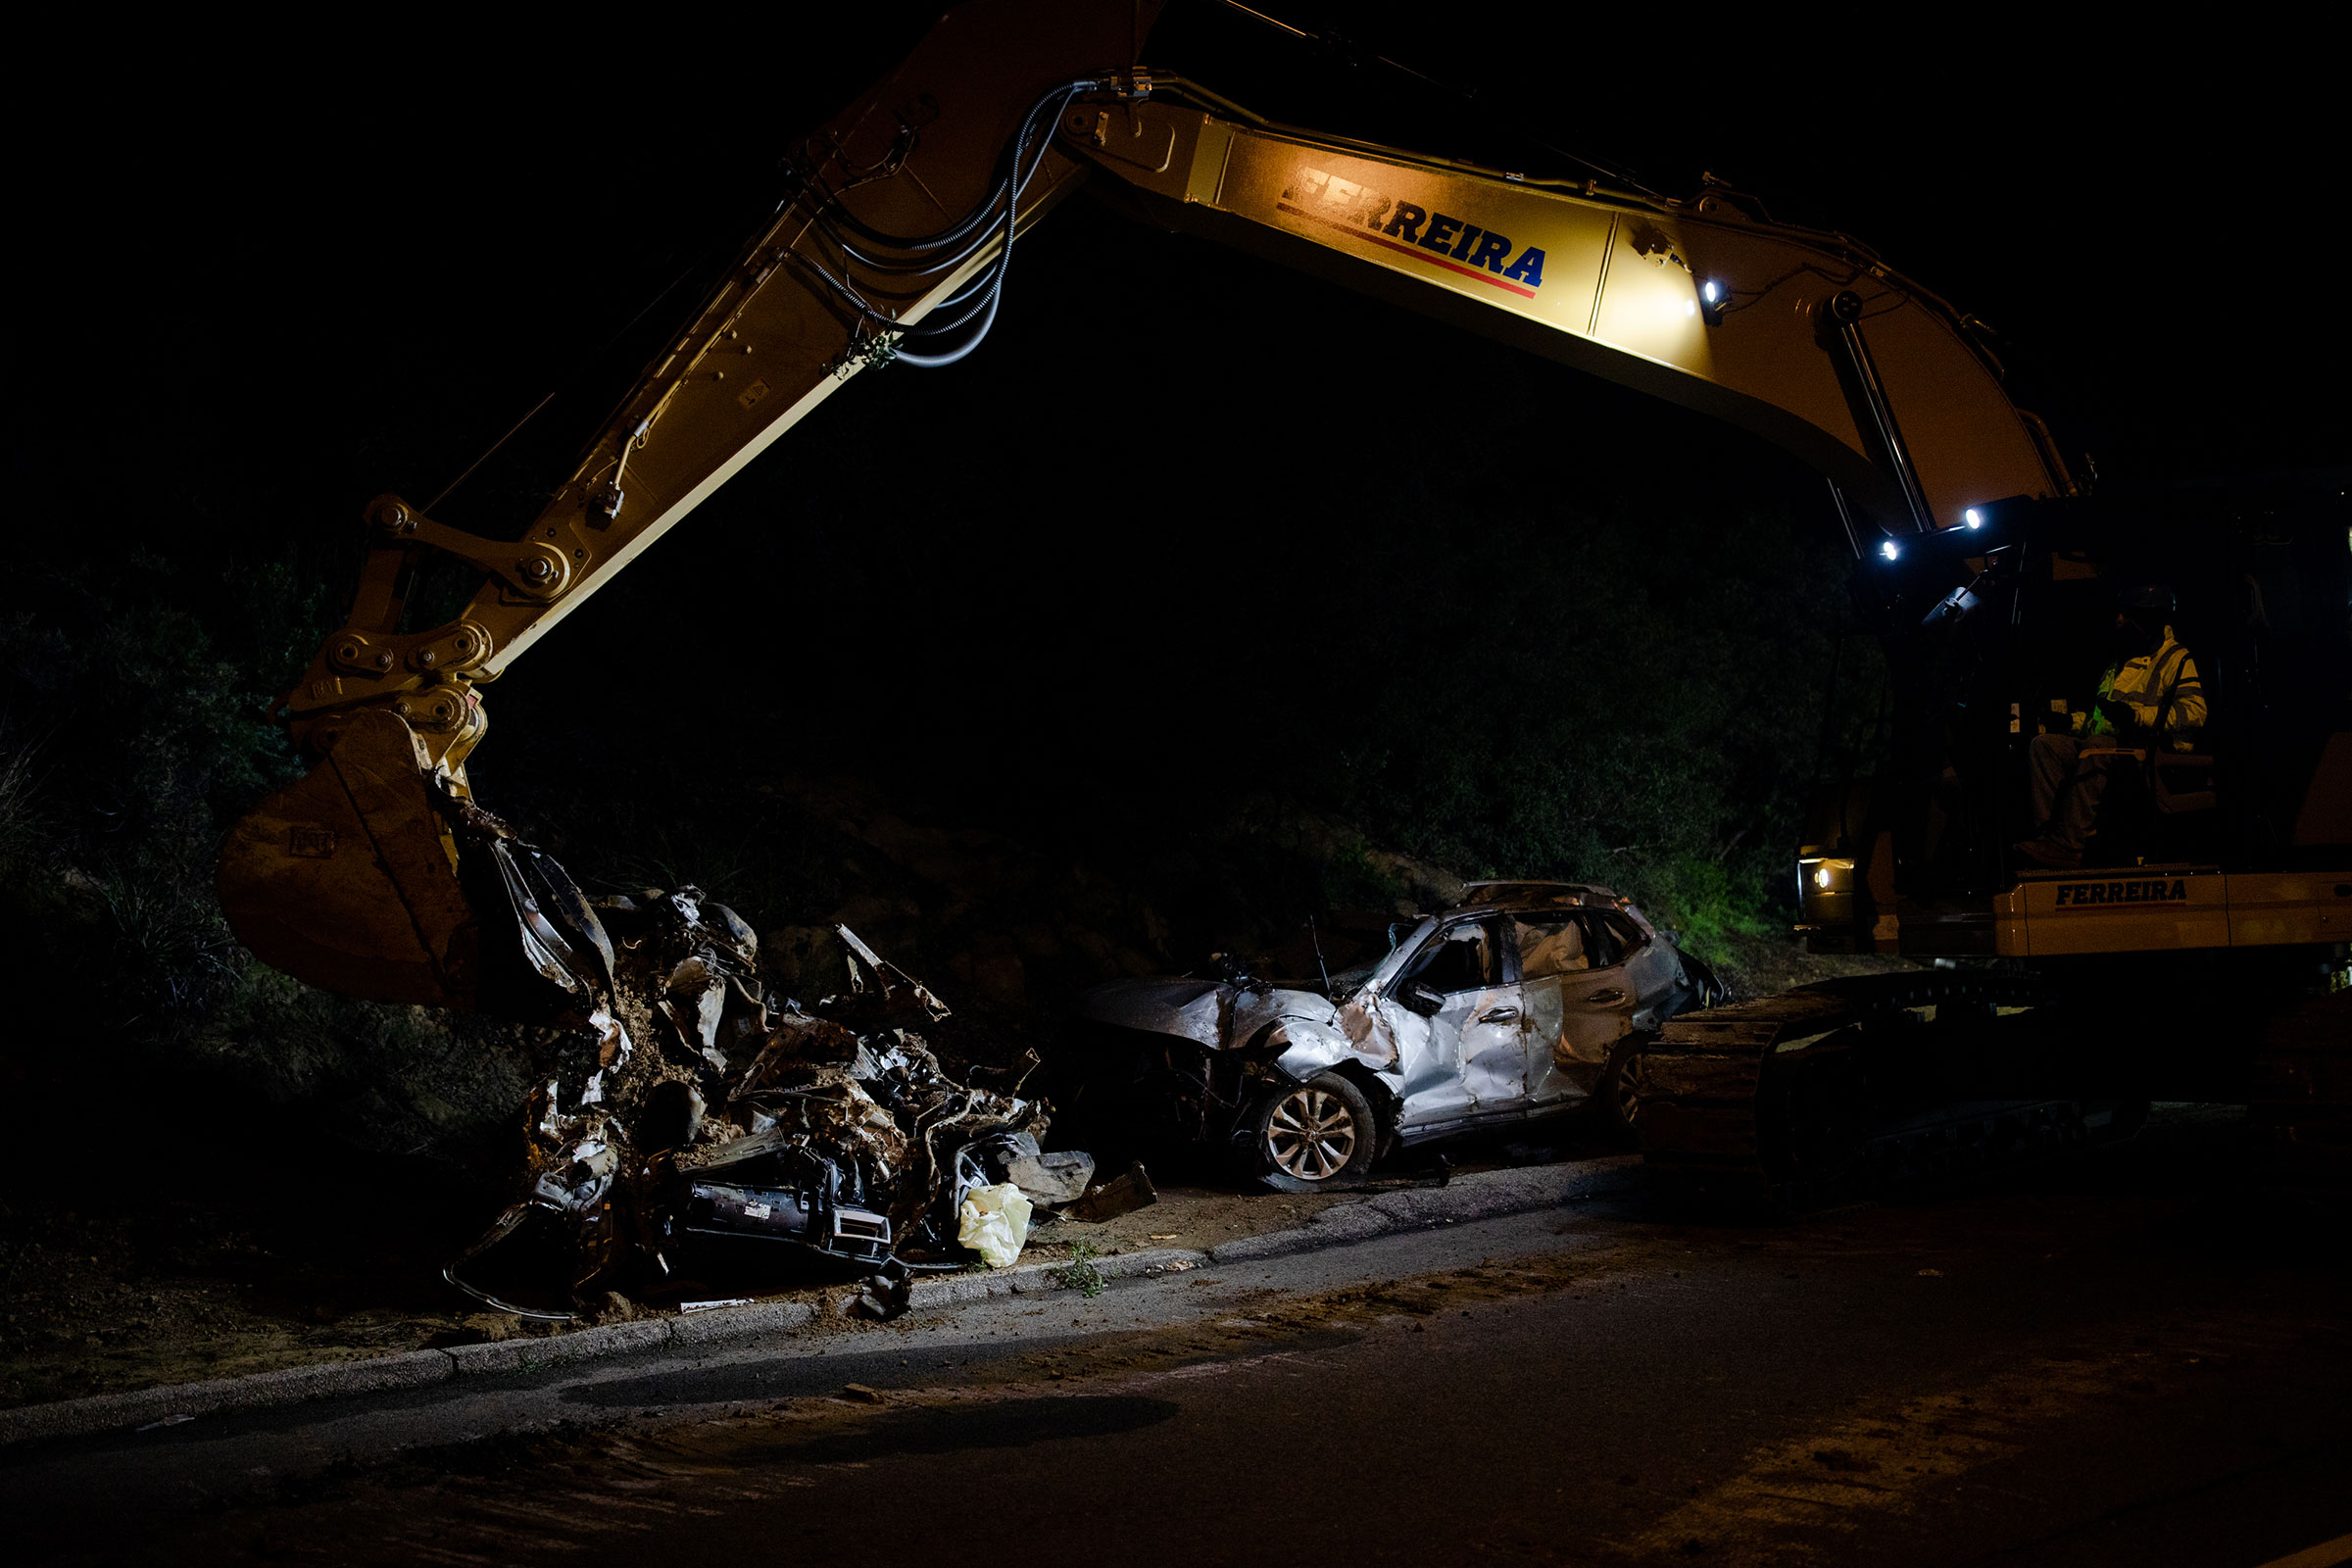 Workers pull what remains of a car from a sinkhole that opened up in the Chatsworth neighborhood of Los Angeles on Jan 10. (Alex Welsh for TIME)